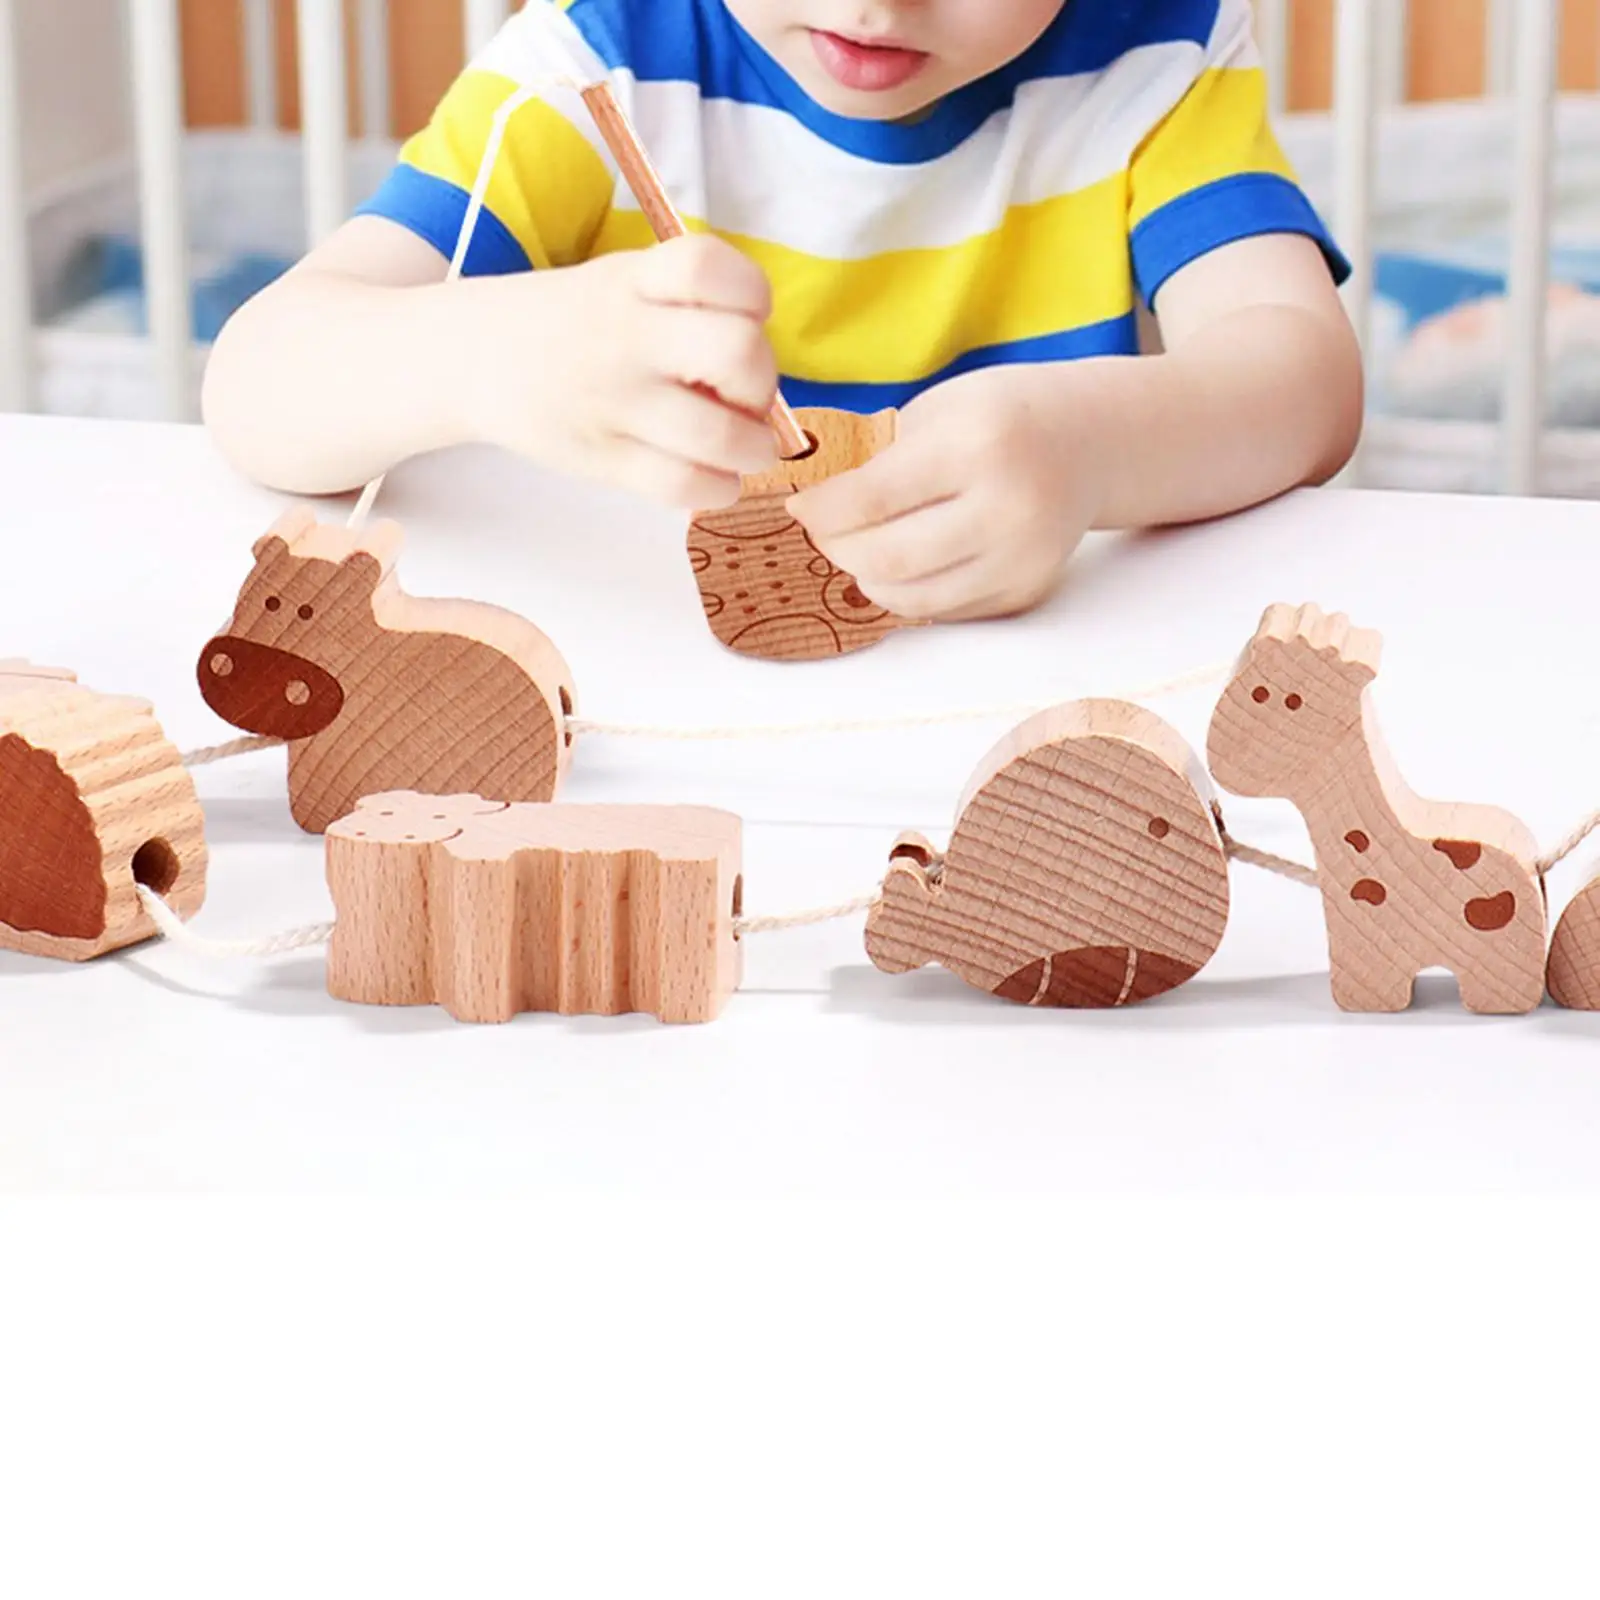 16Pcs Animal Blocks Threading Toy Fine Motor Skill for Ages 3 4 5 Years Old